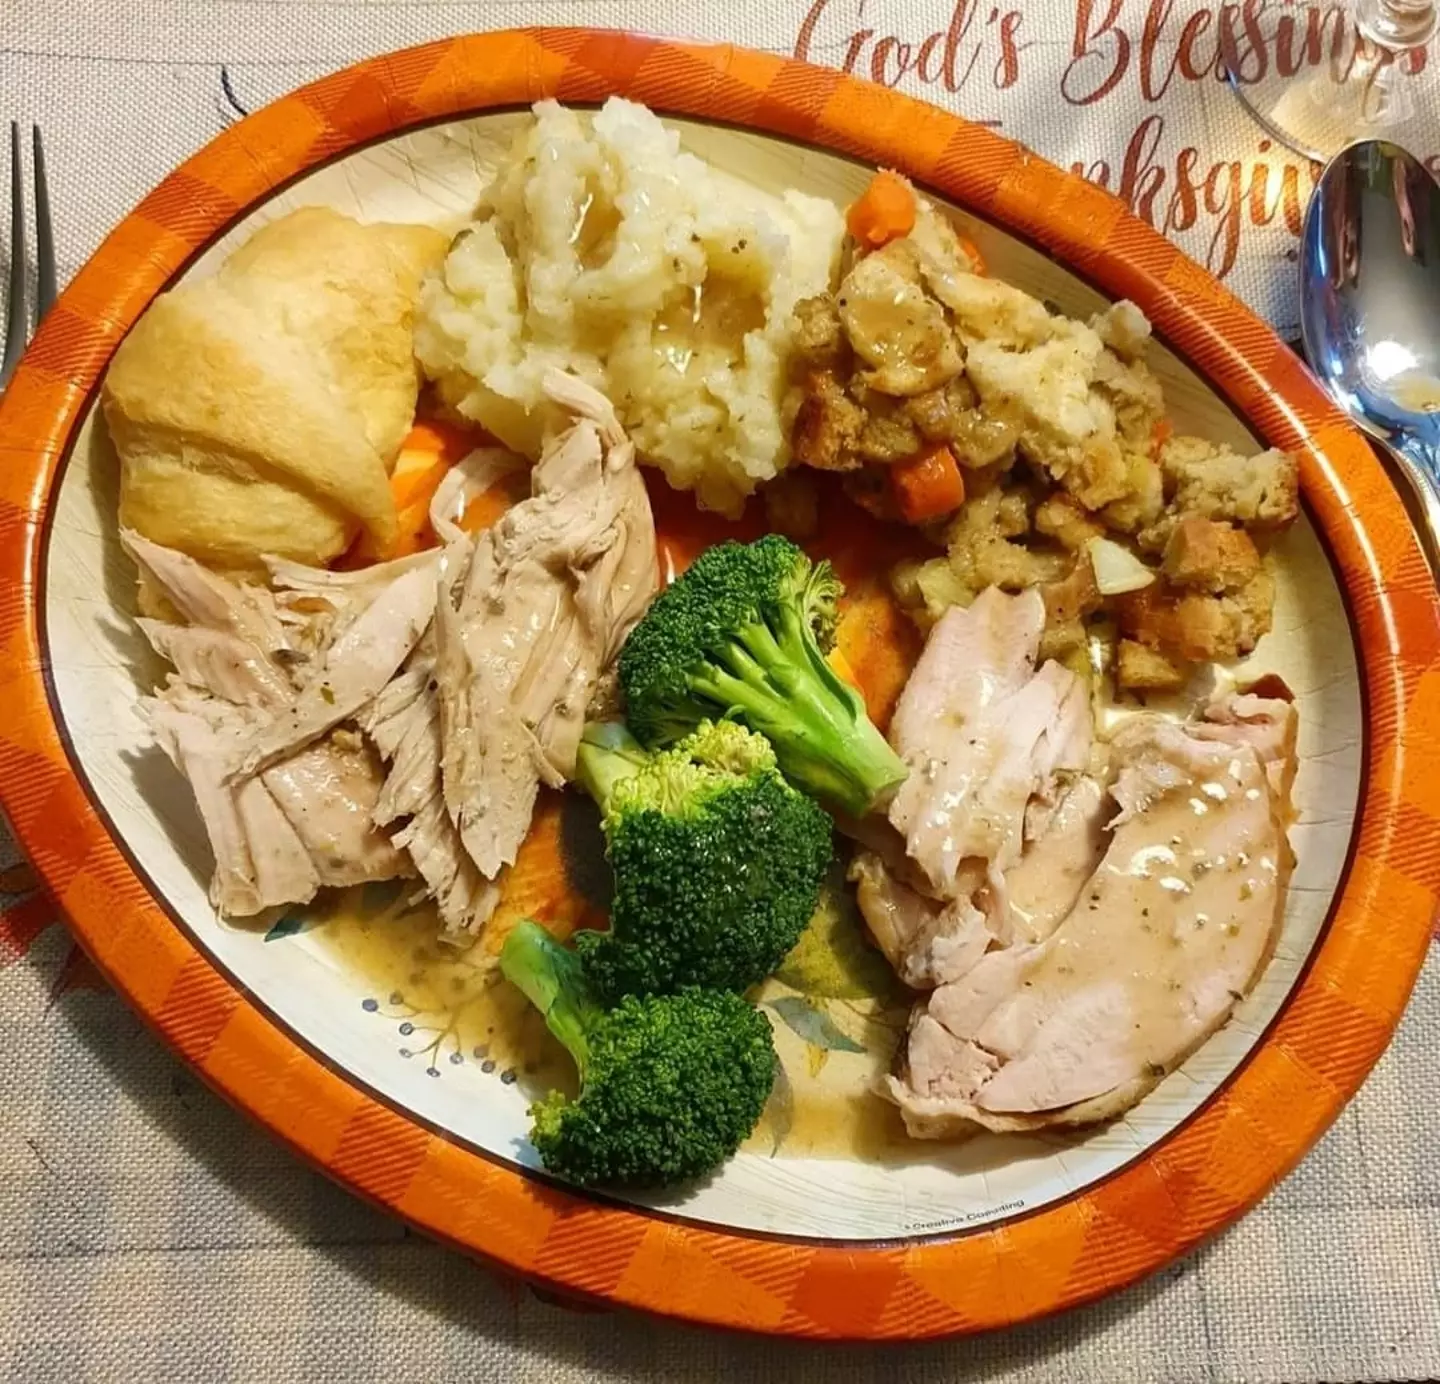 Not a roastie to be seen on this festive dinner plate.